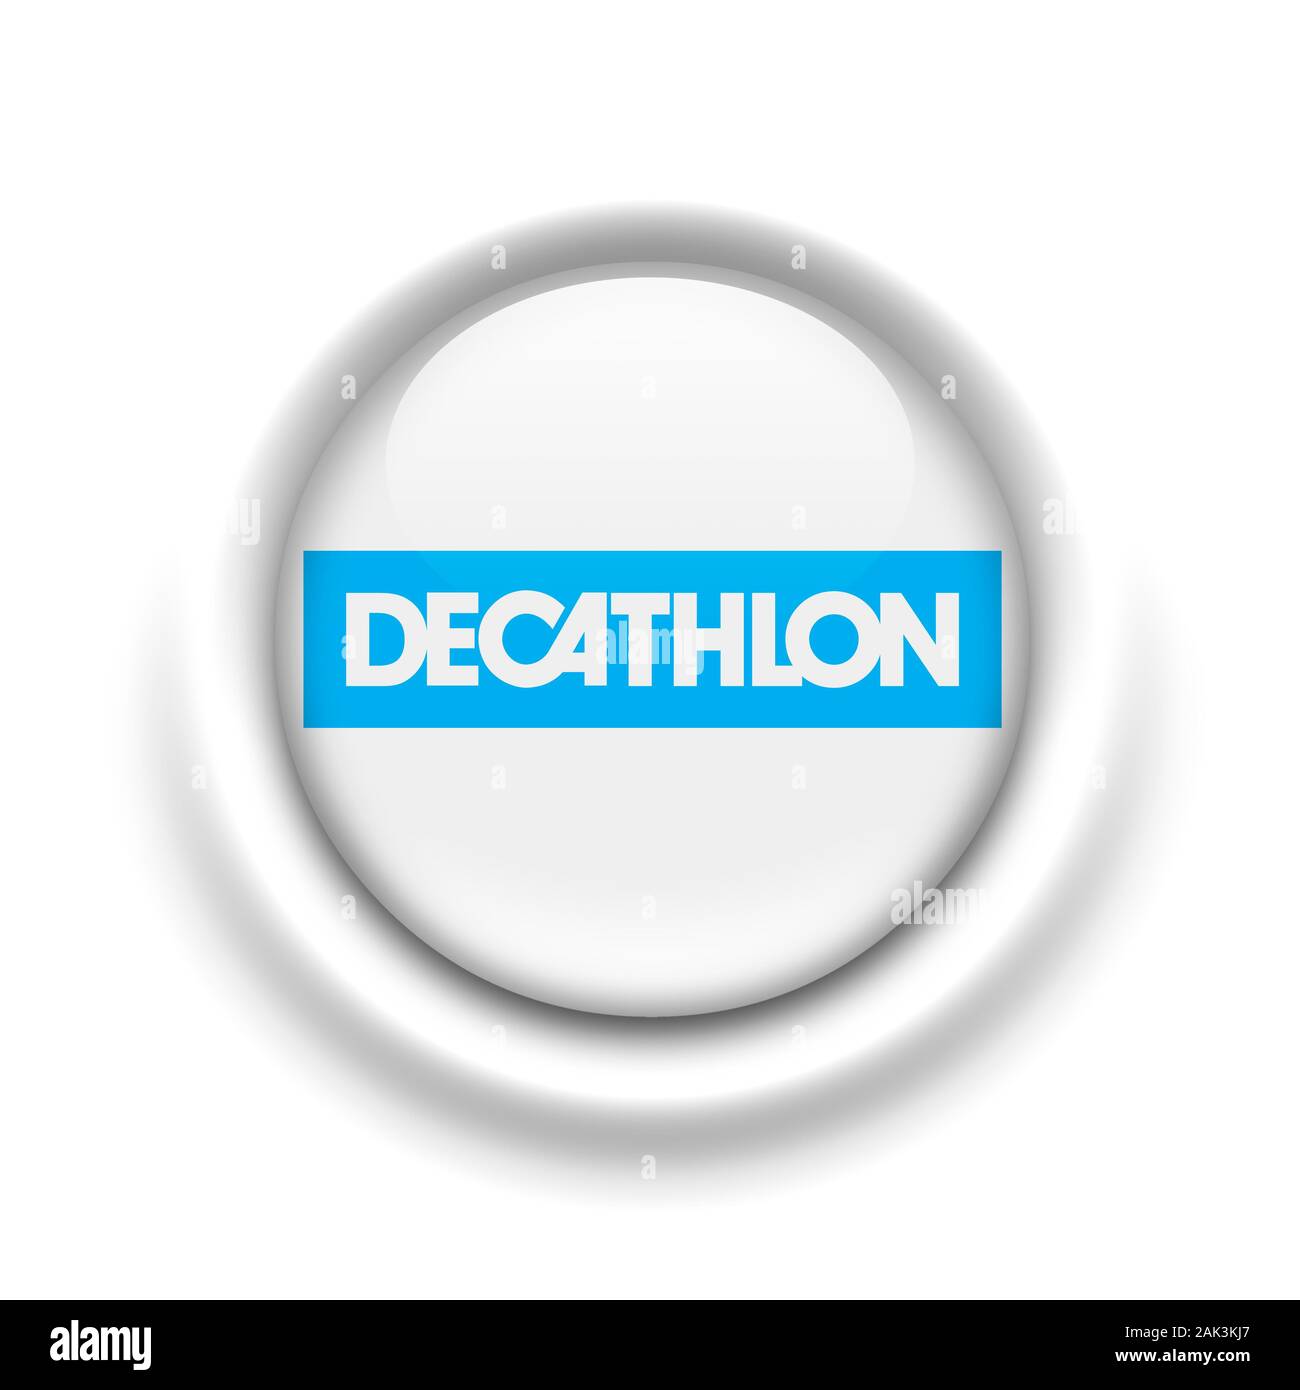 Decathlon Logo High Resolution Stock Photography and Images - Alamy